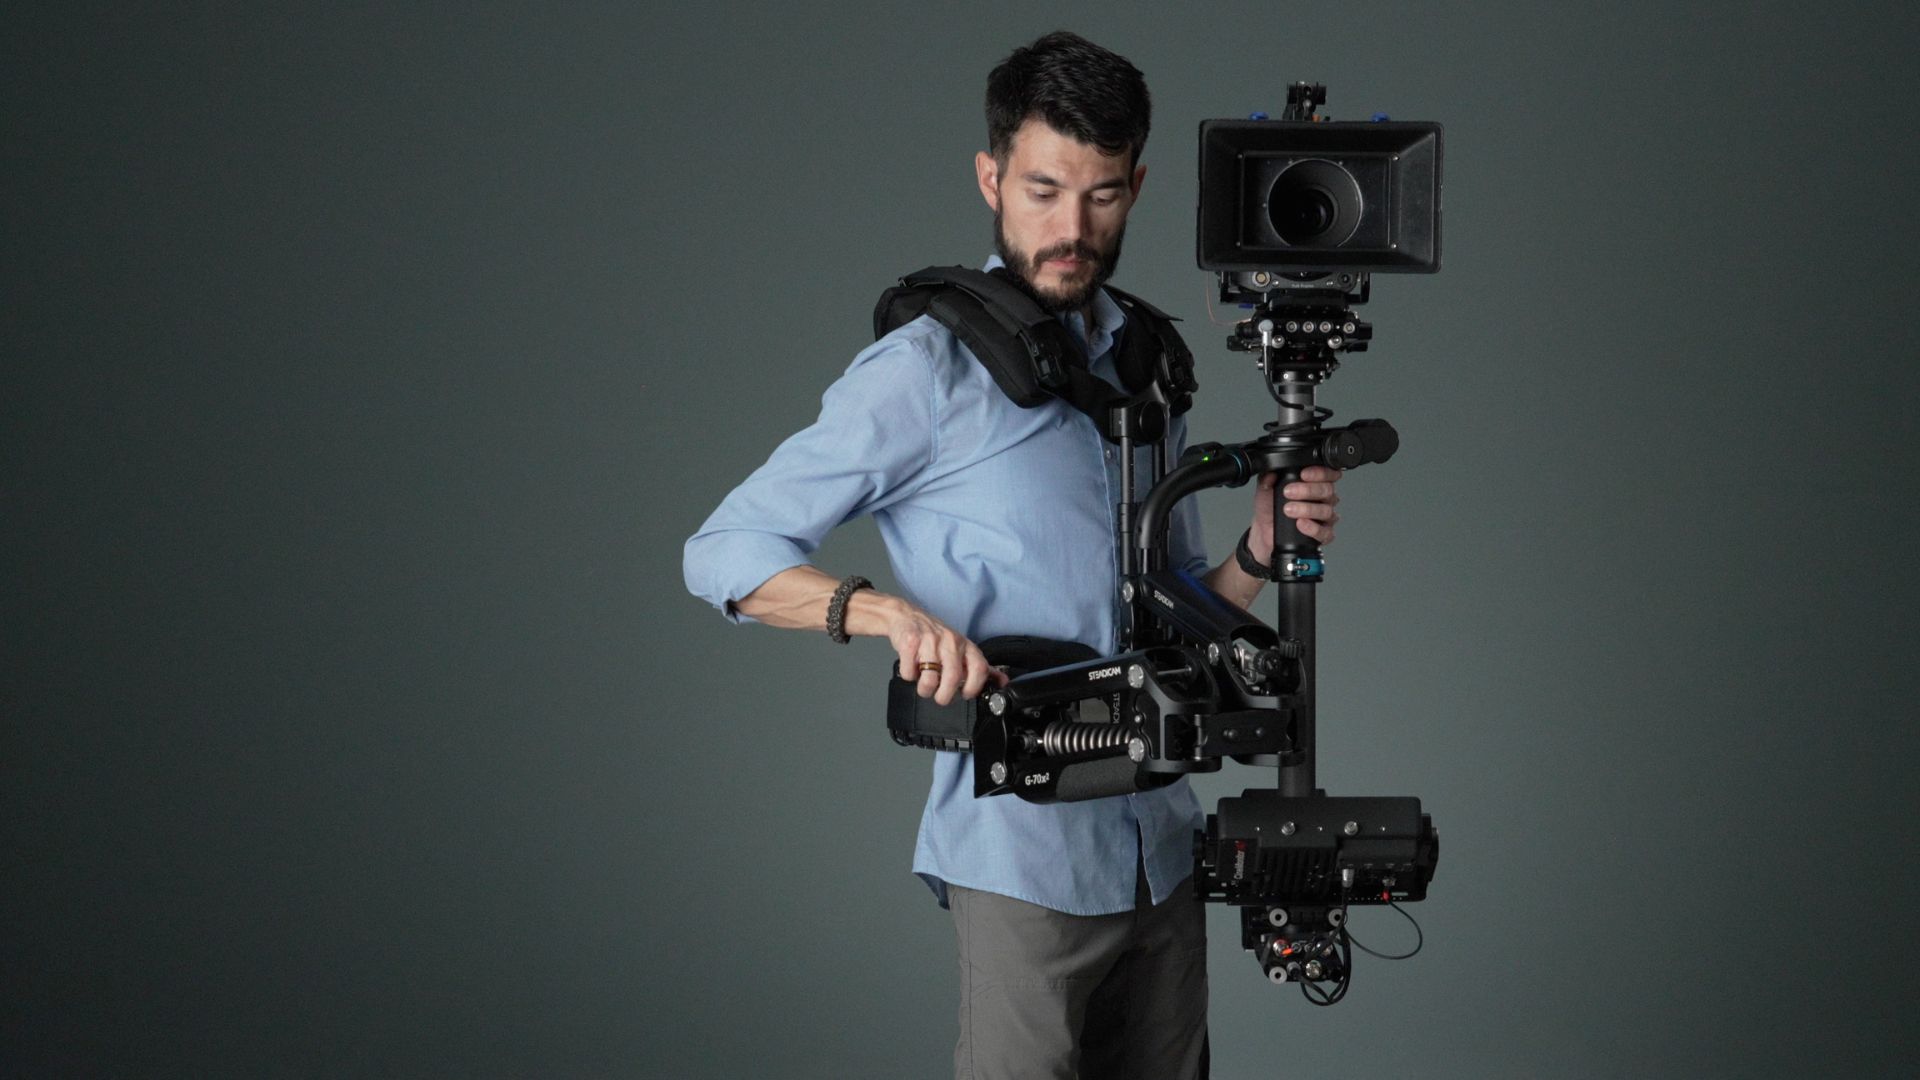 The new Steadicam G-70x2 in action; available for pre-order